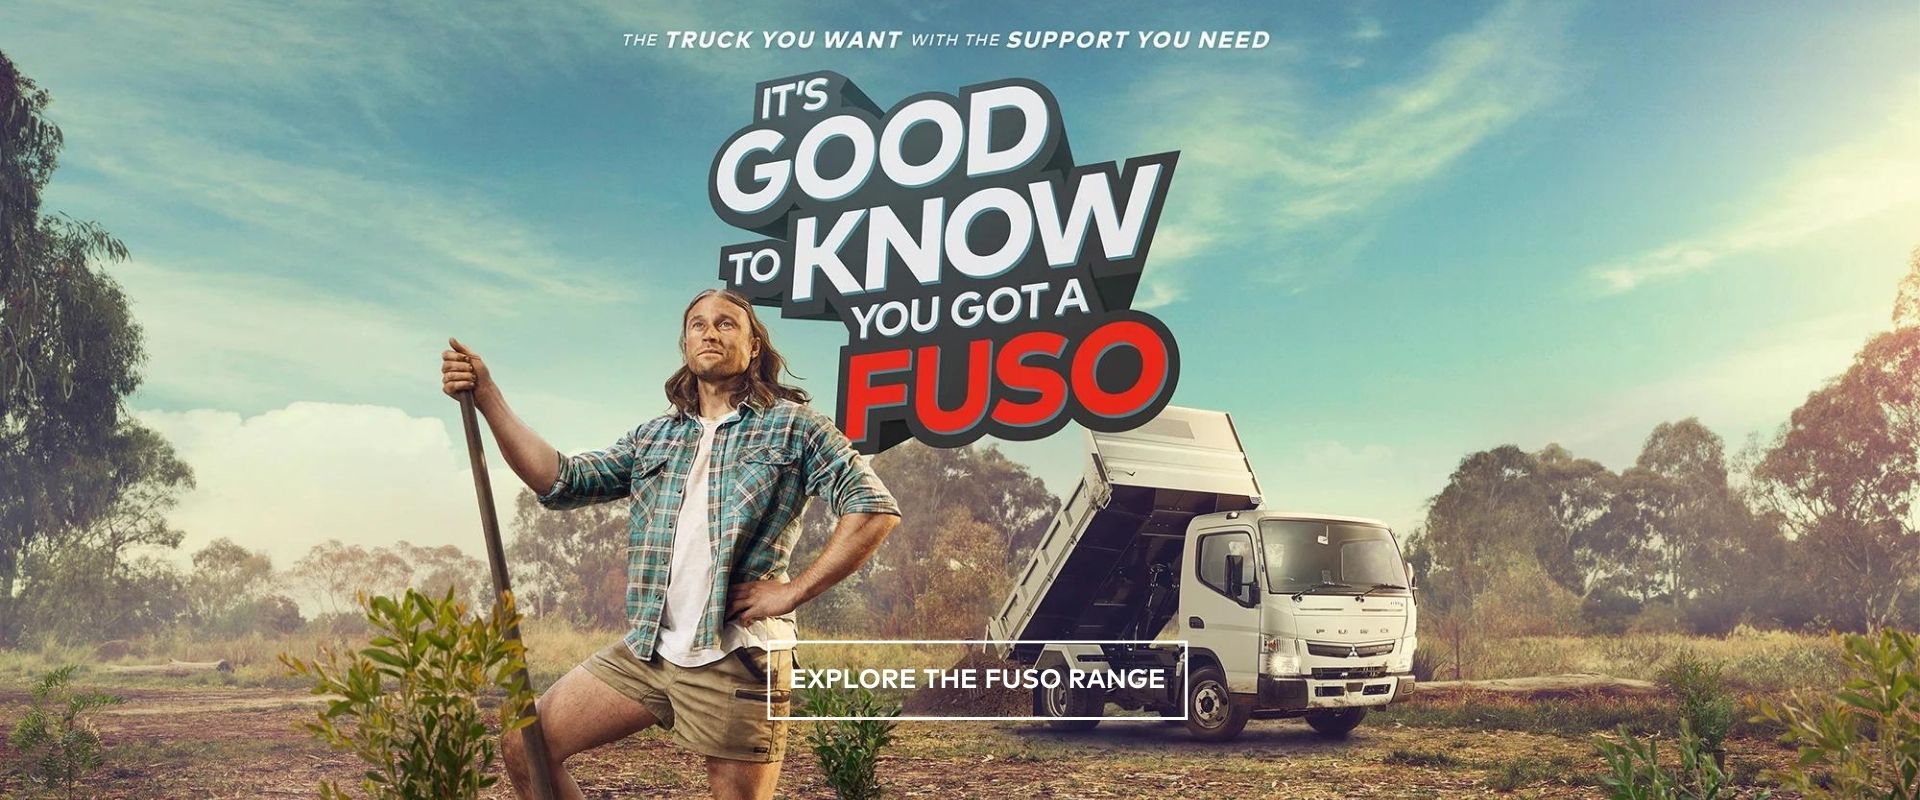 The truck you want with the support you need. It's good to know you got a Fuso. Explore the Fuso range.